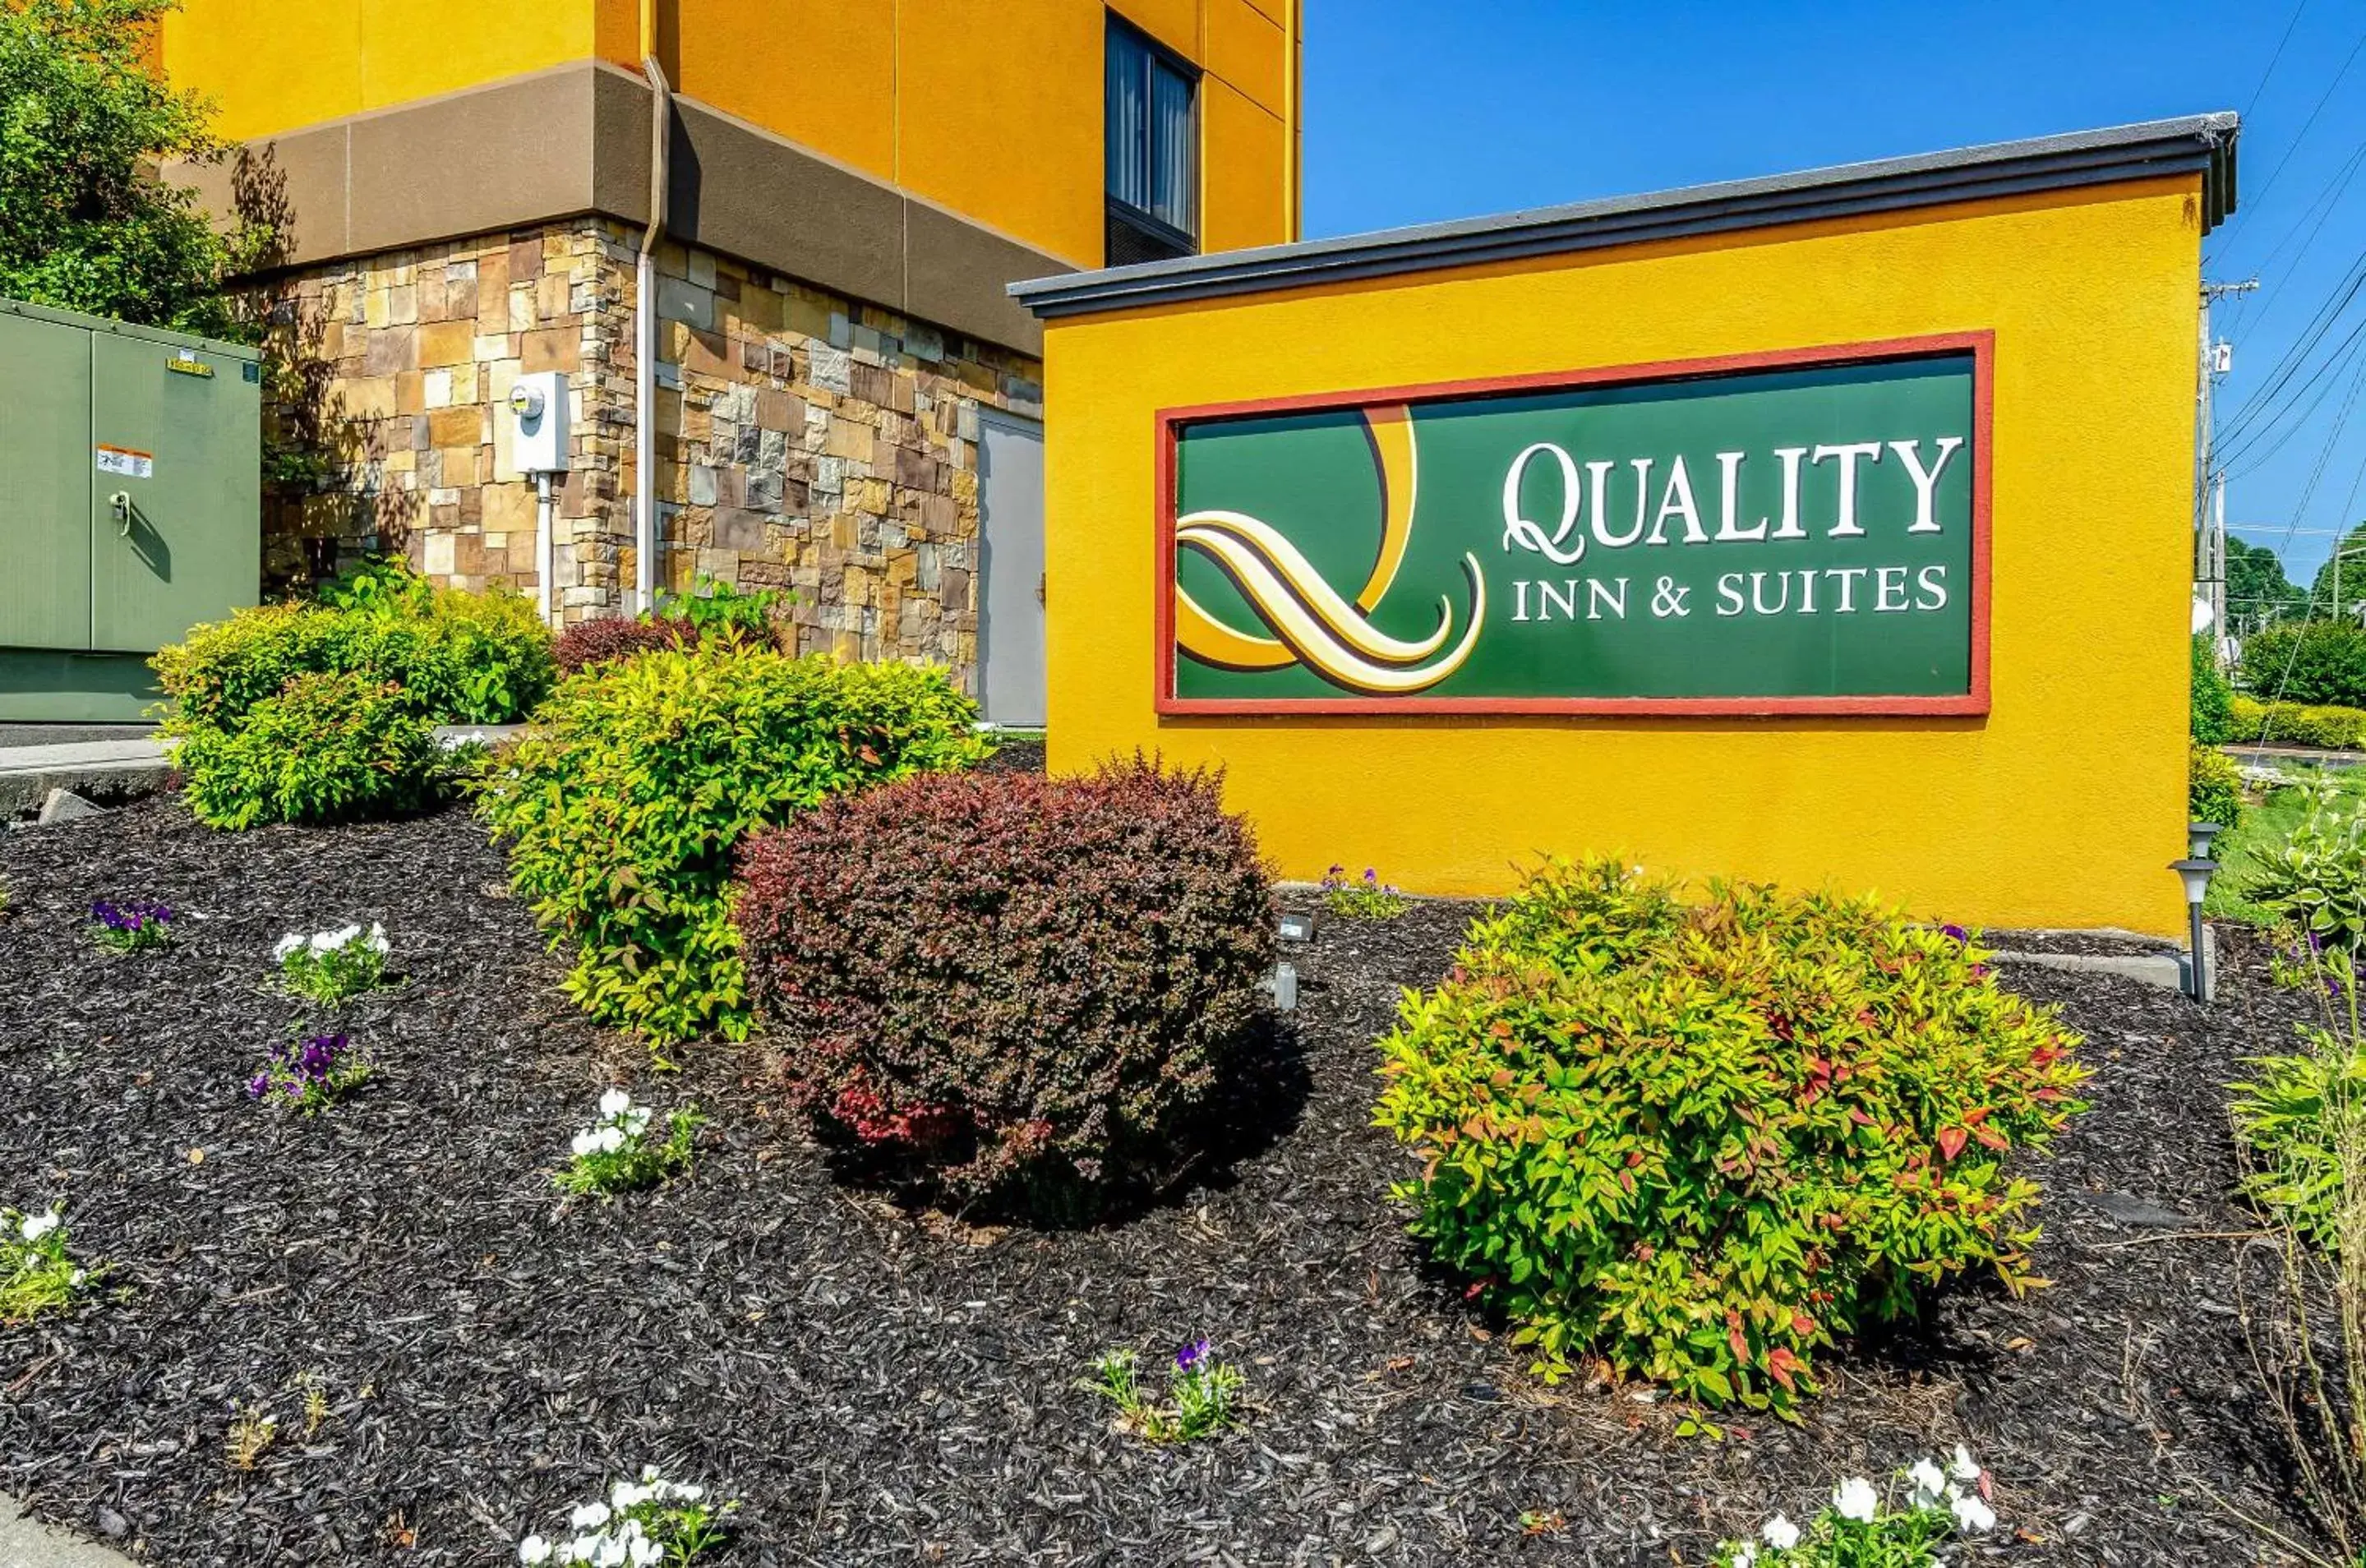 Property building in Quality Inn & Suites Abingdon